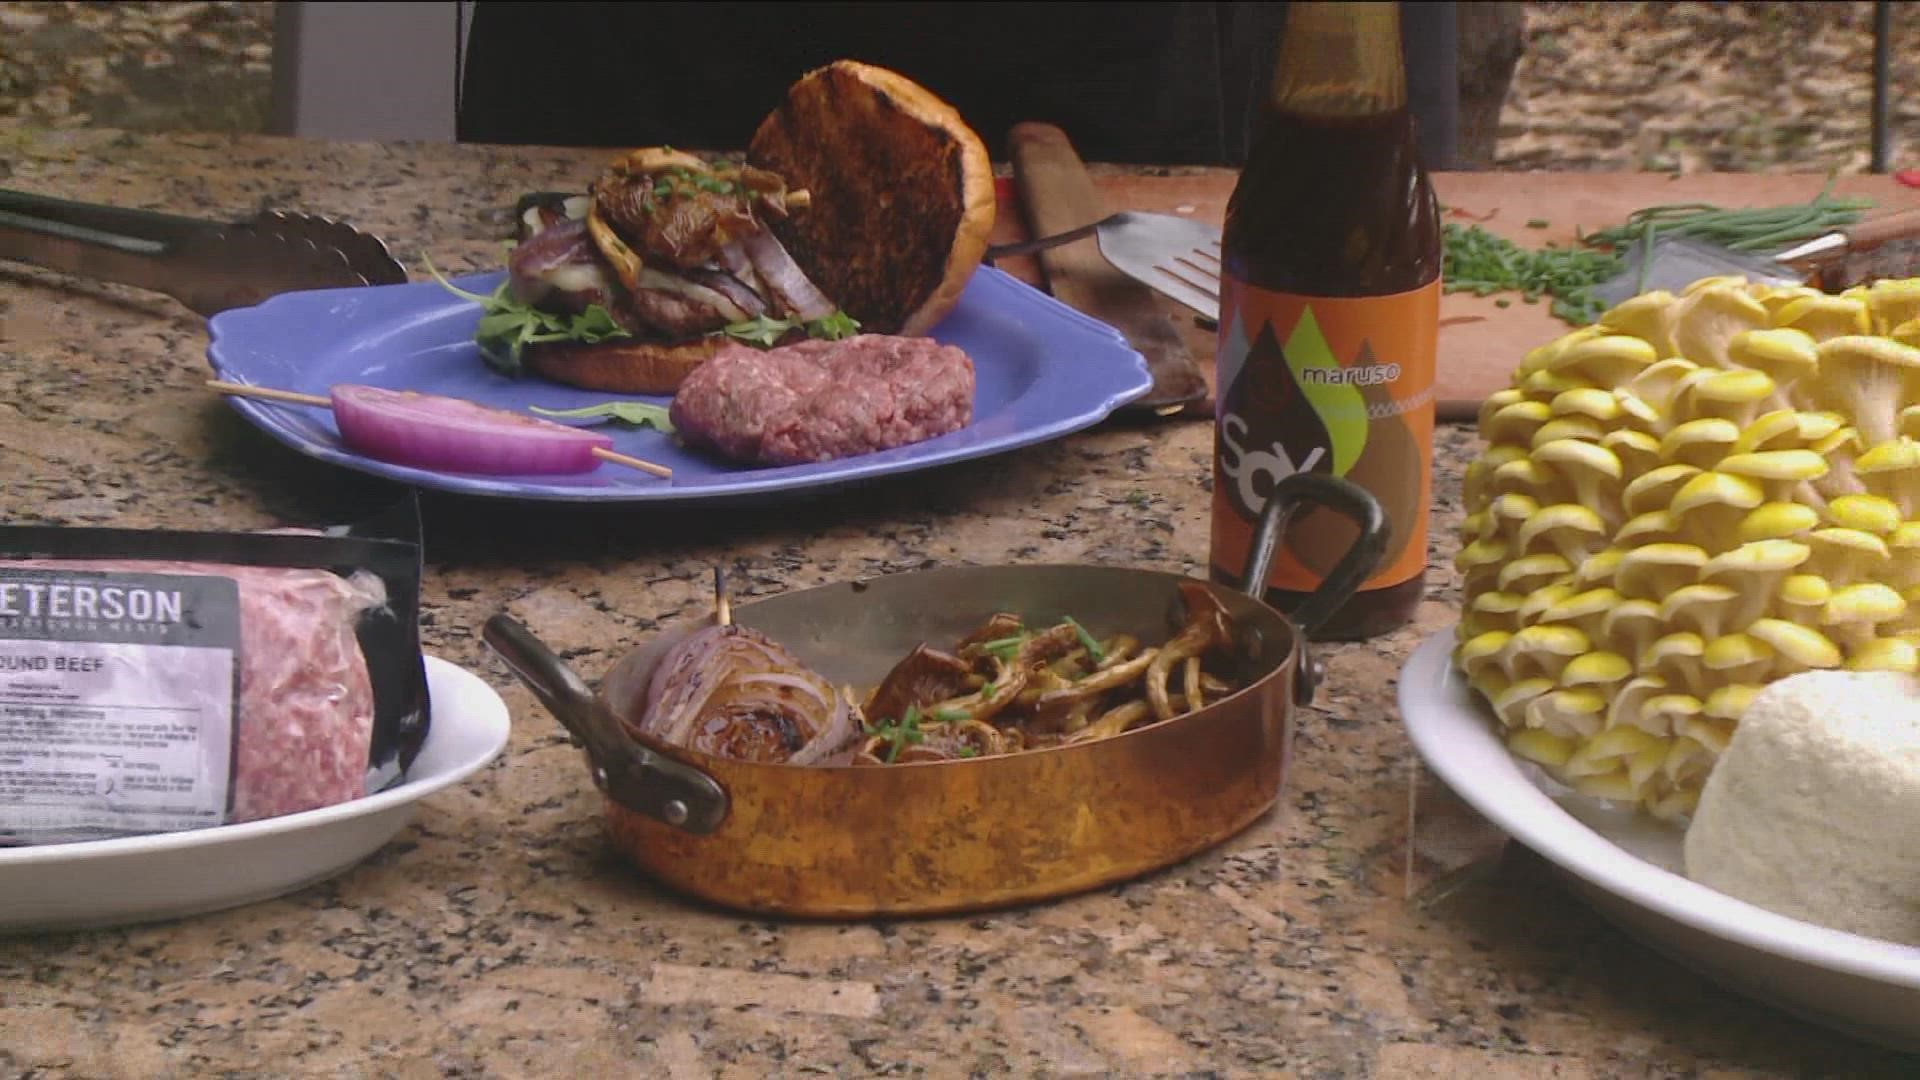 During KARE 11 Saturday, Karl Benson from Cooks of Crocus Hill demonstrated how to cook their delicious mushroom burger.